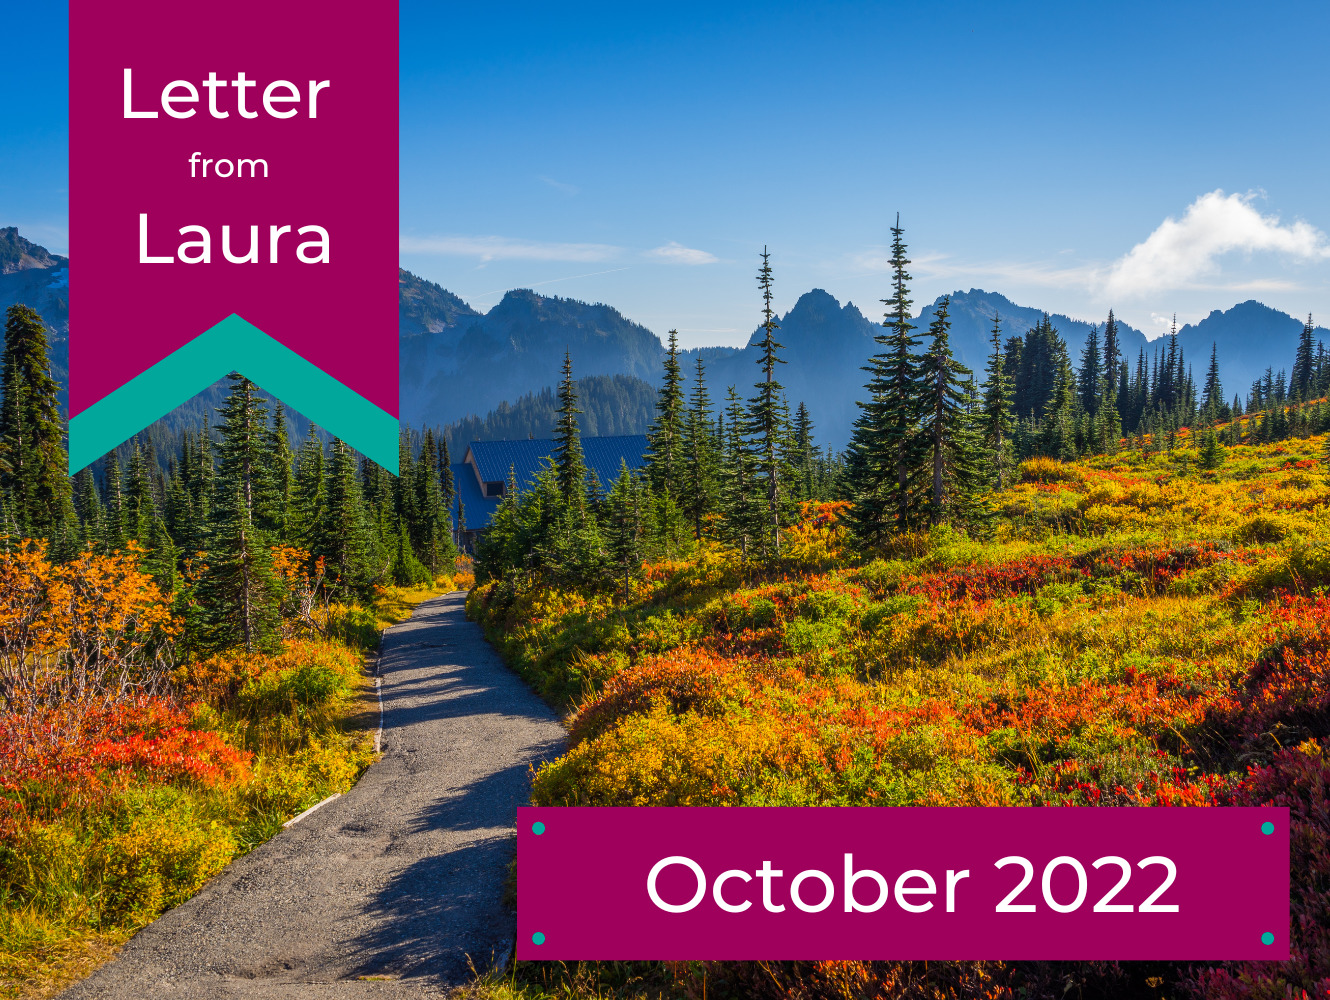 Letter from Laura, October 2022. A walking trail meanders through low fall foliage with the Cascades in the background.